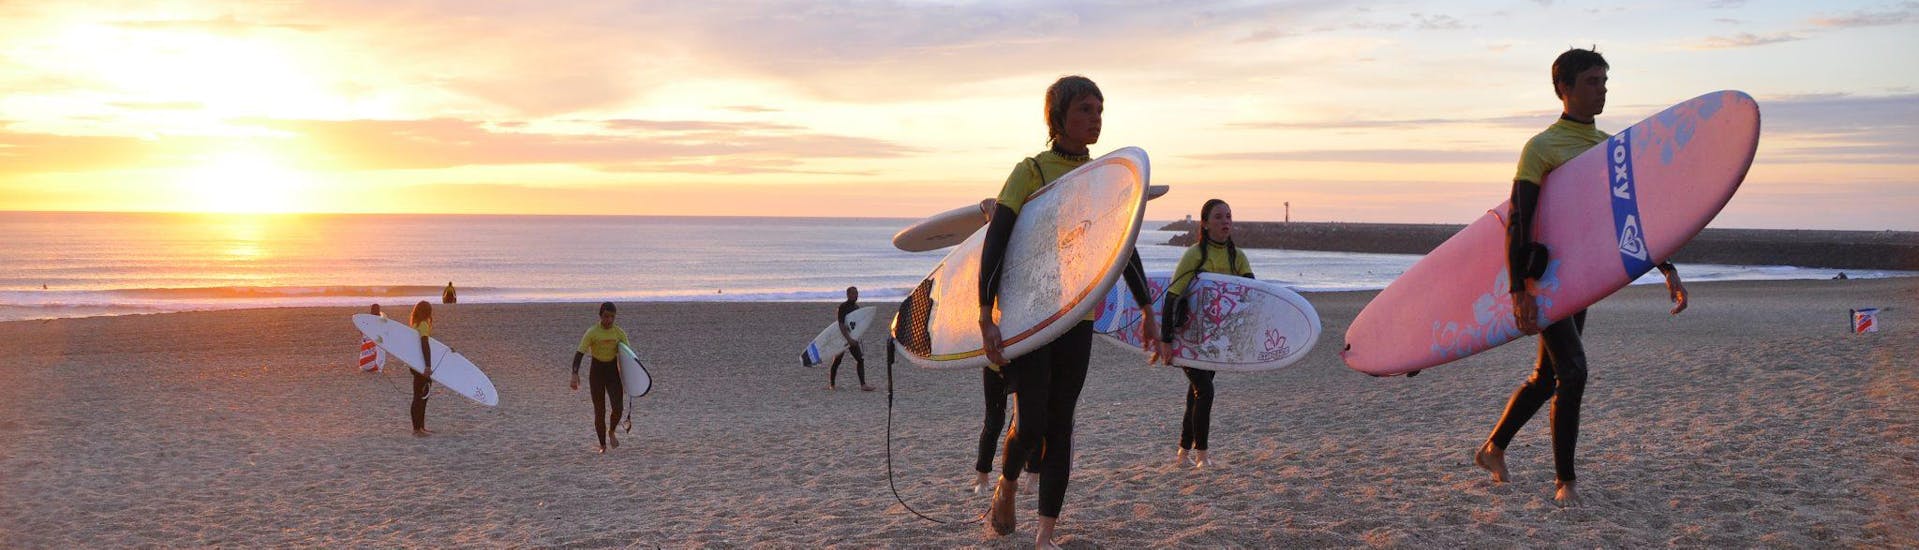 A family is following the surf instructor on the beach during the Surfing Lessons on Cavaliers Beach for Families with Gliss'Experience Anglet.